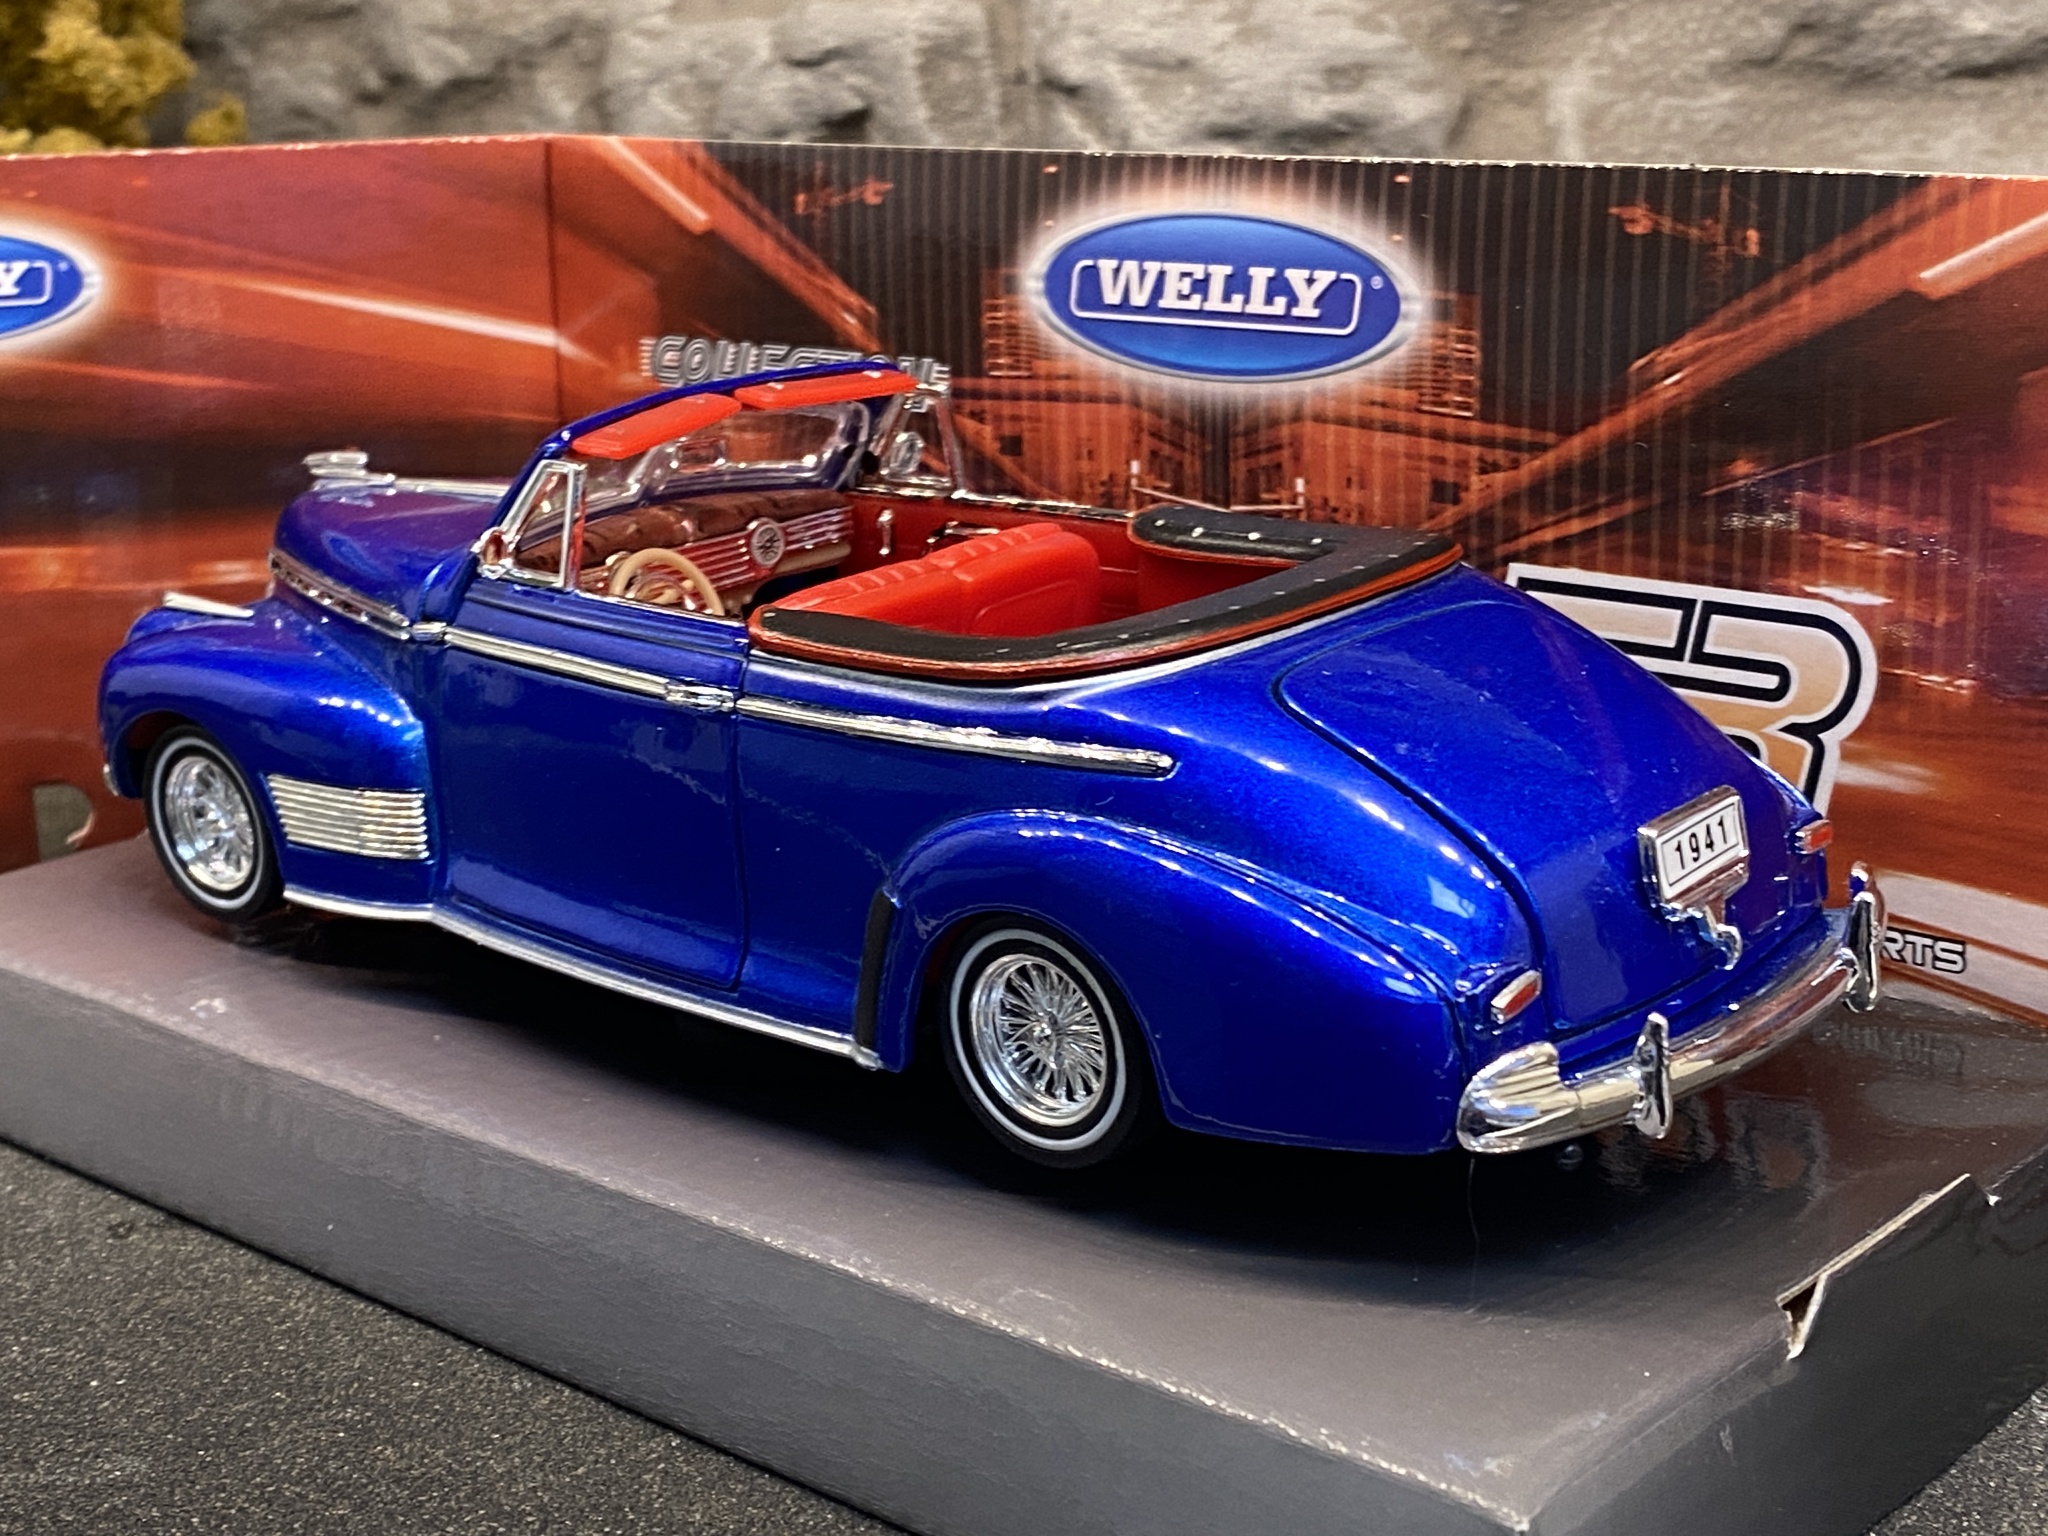 Skala 1/24: Chevrolet Special Deluxe 41' Conv. Blue met. fr Welly Hotrider Collection